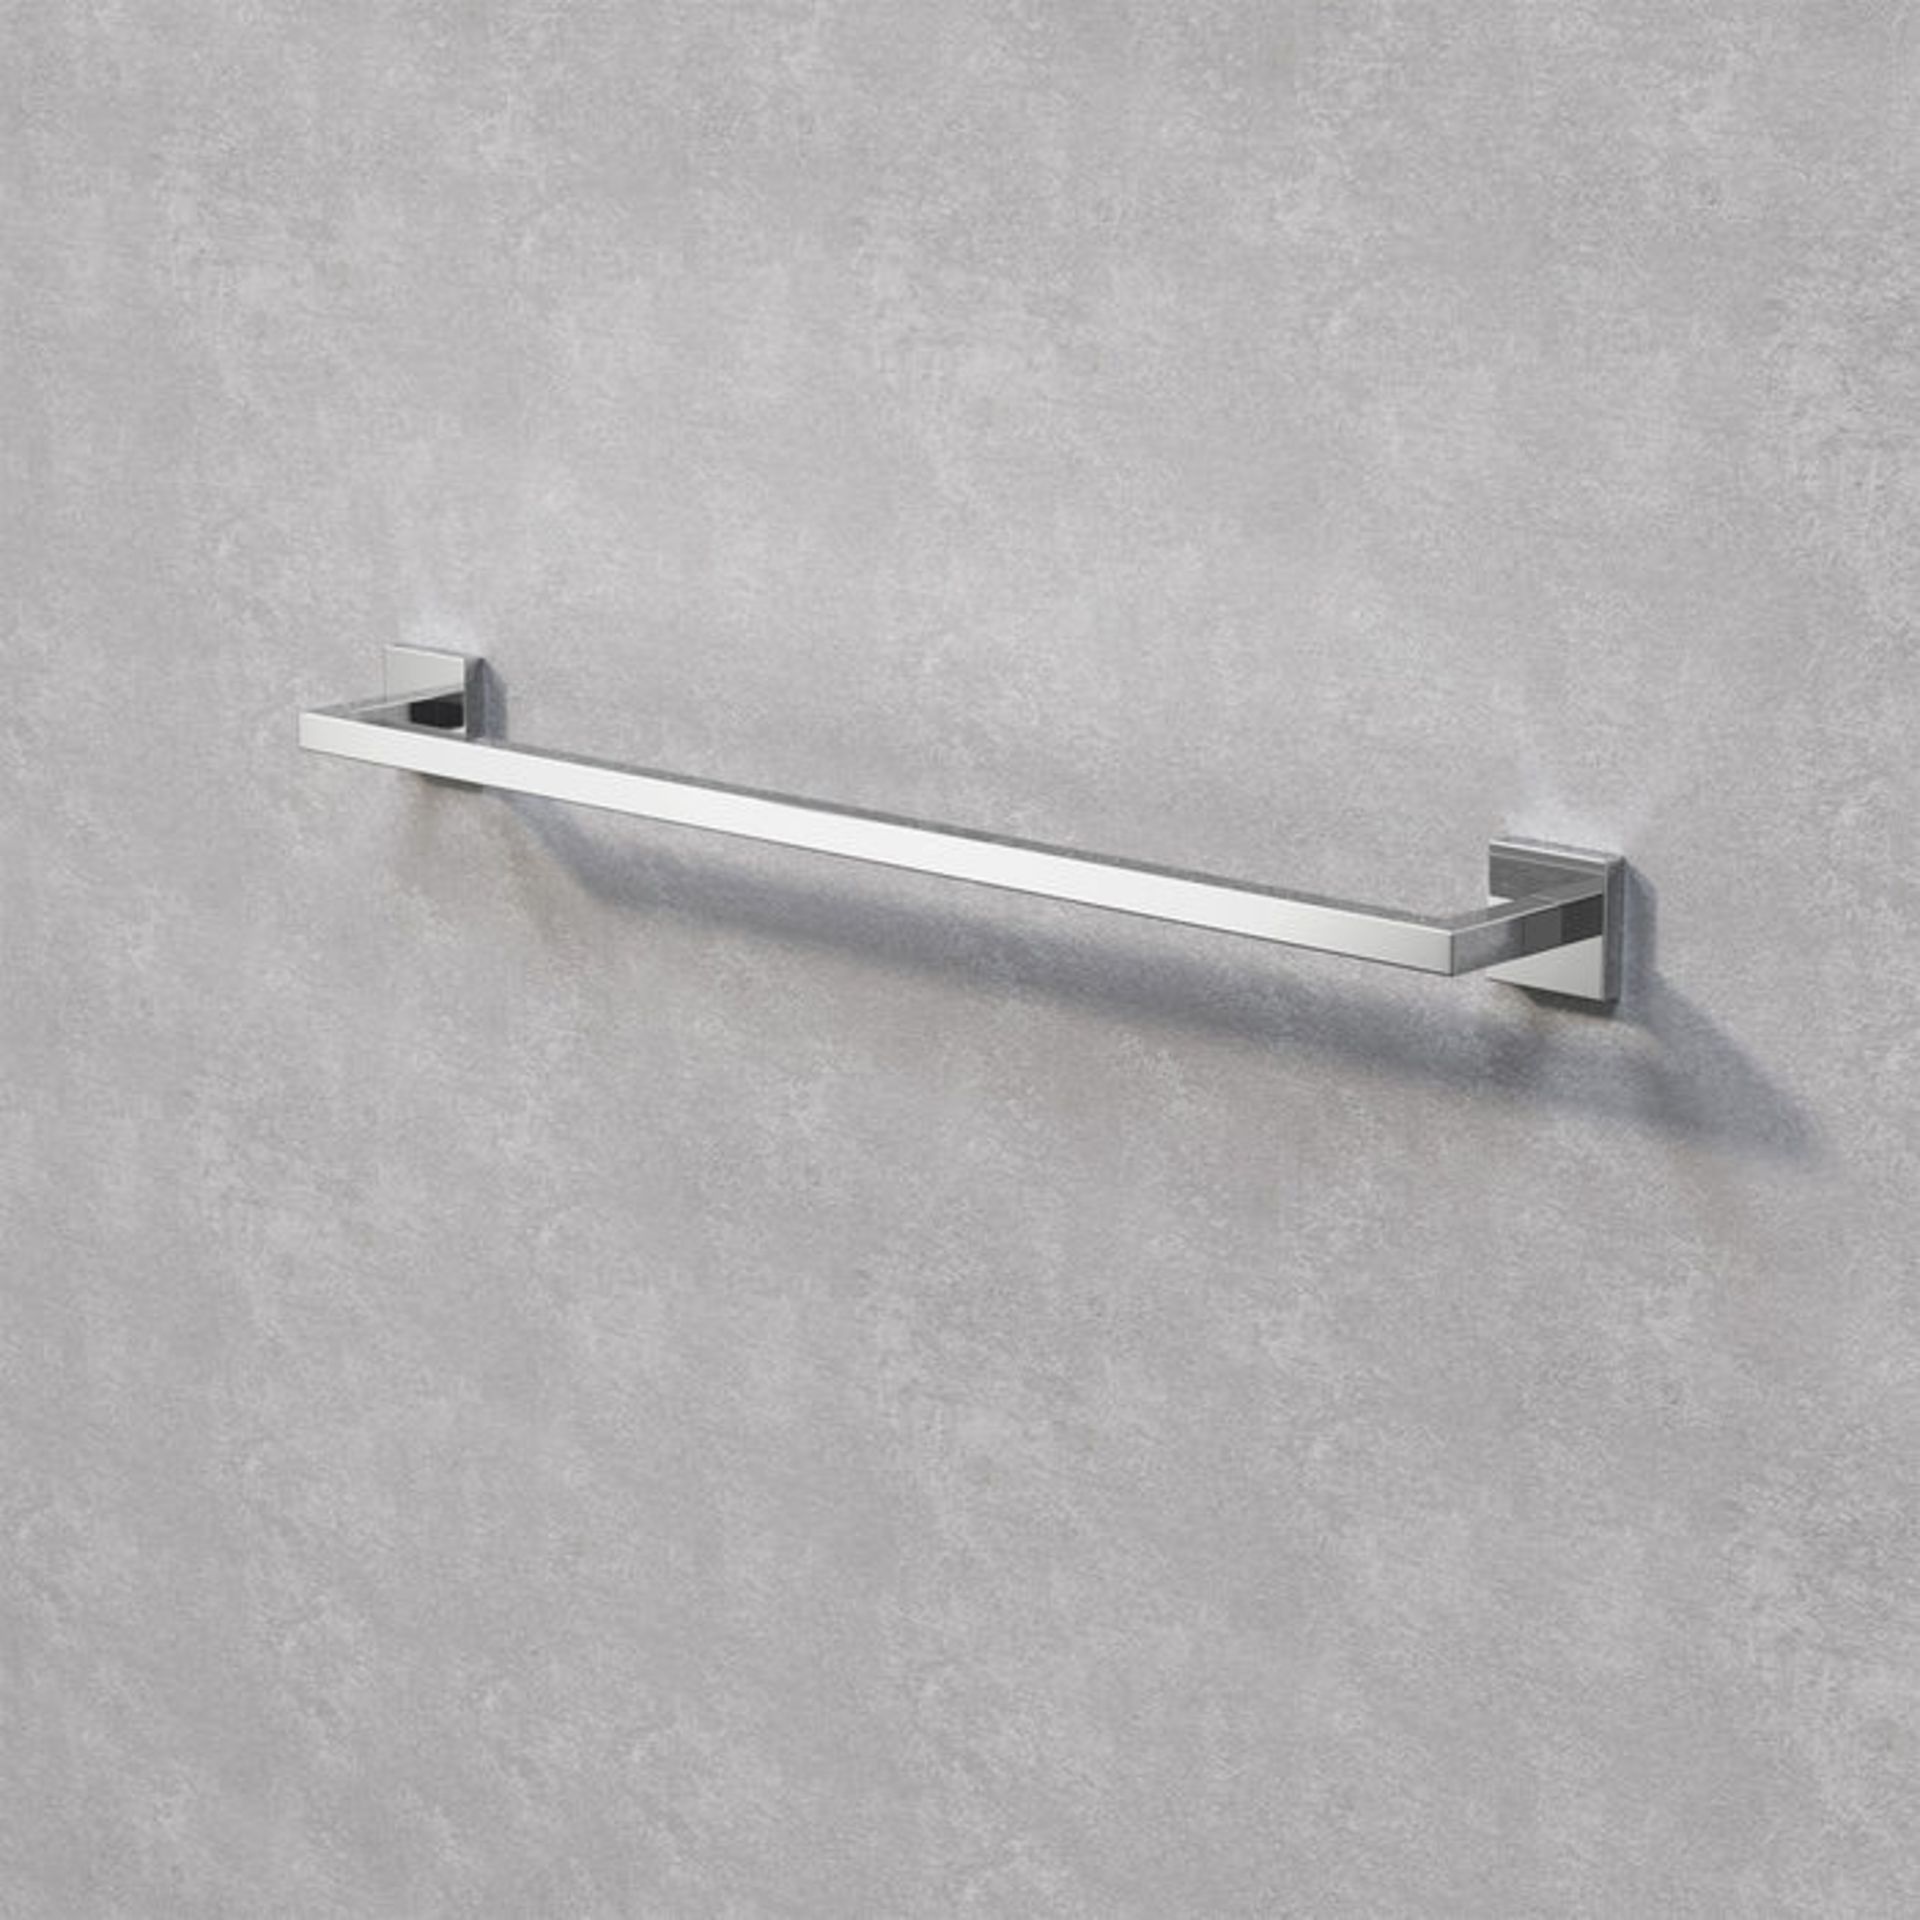 (NF110) Jesmond Towel Rail Finishes your bathroom with a little extra functionality and style Made - Image 3 of 3